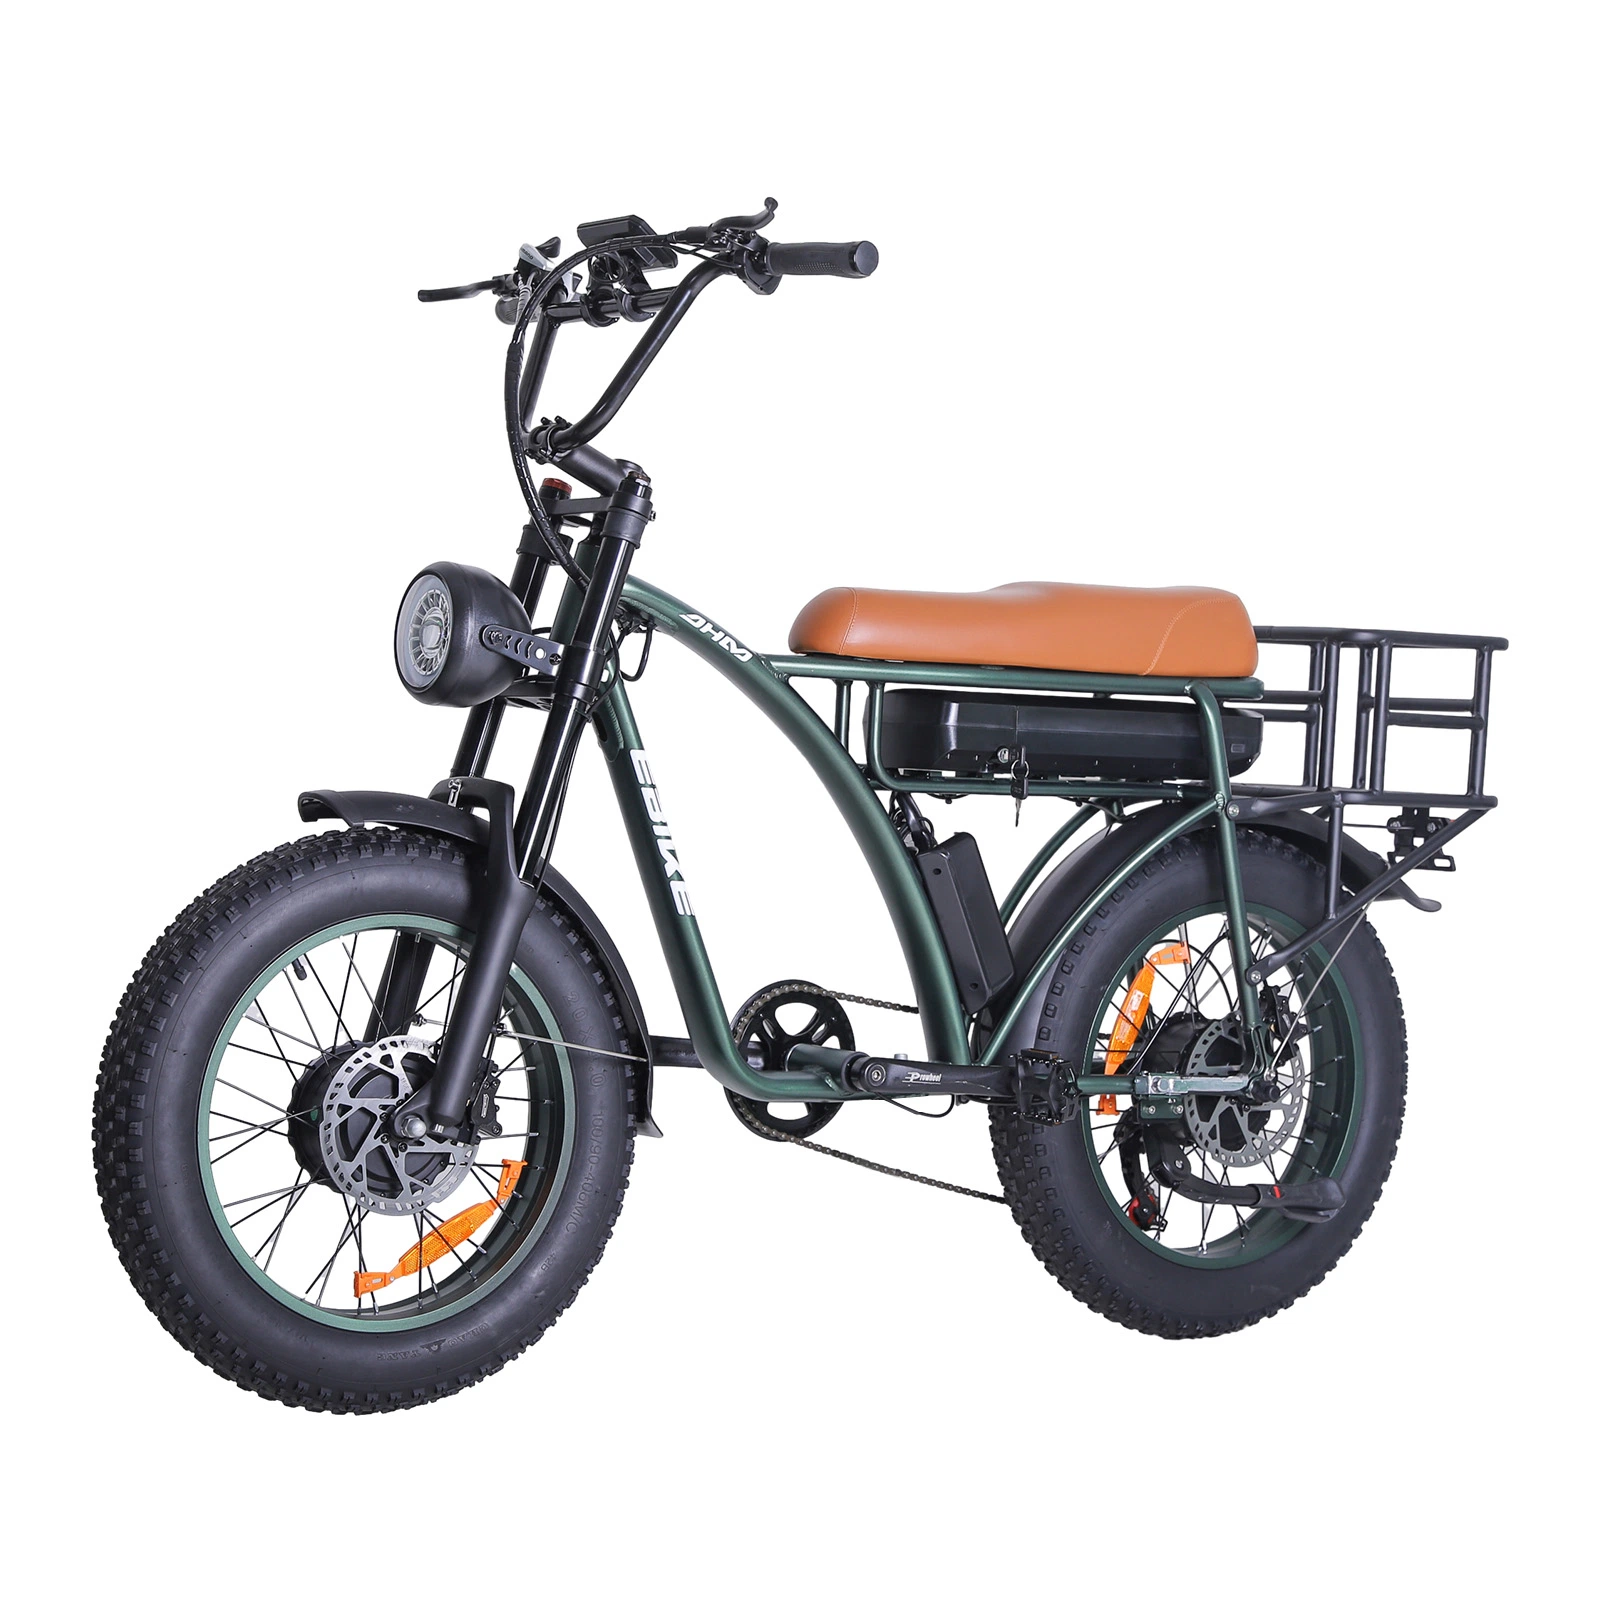 Wholesale New Electric Bicycle Ebike Model Fat Tire Electric Bike Electric Bicycle Dual Hub Motor 1000W Electric Fat Bike Dirt Bicycle